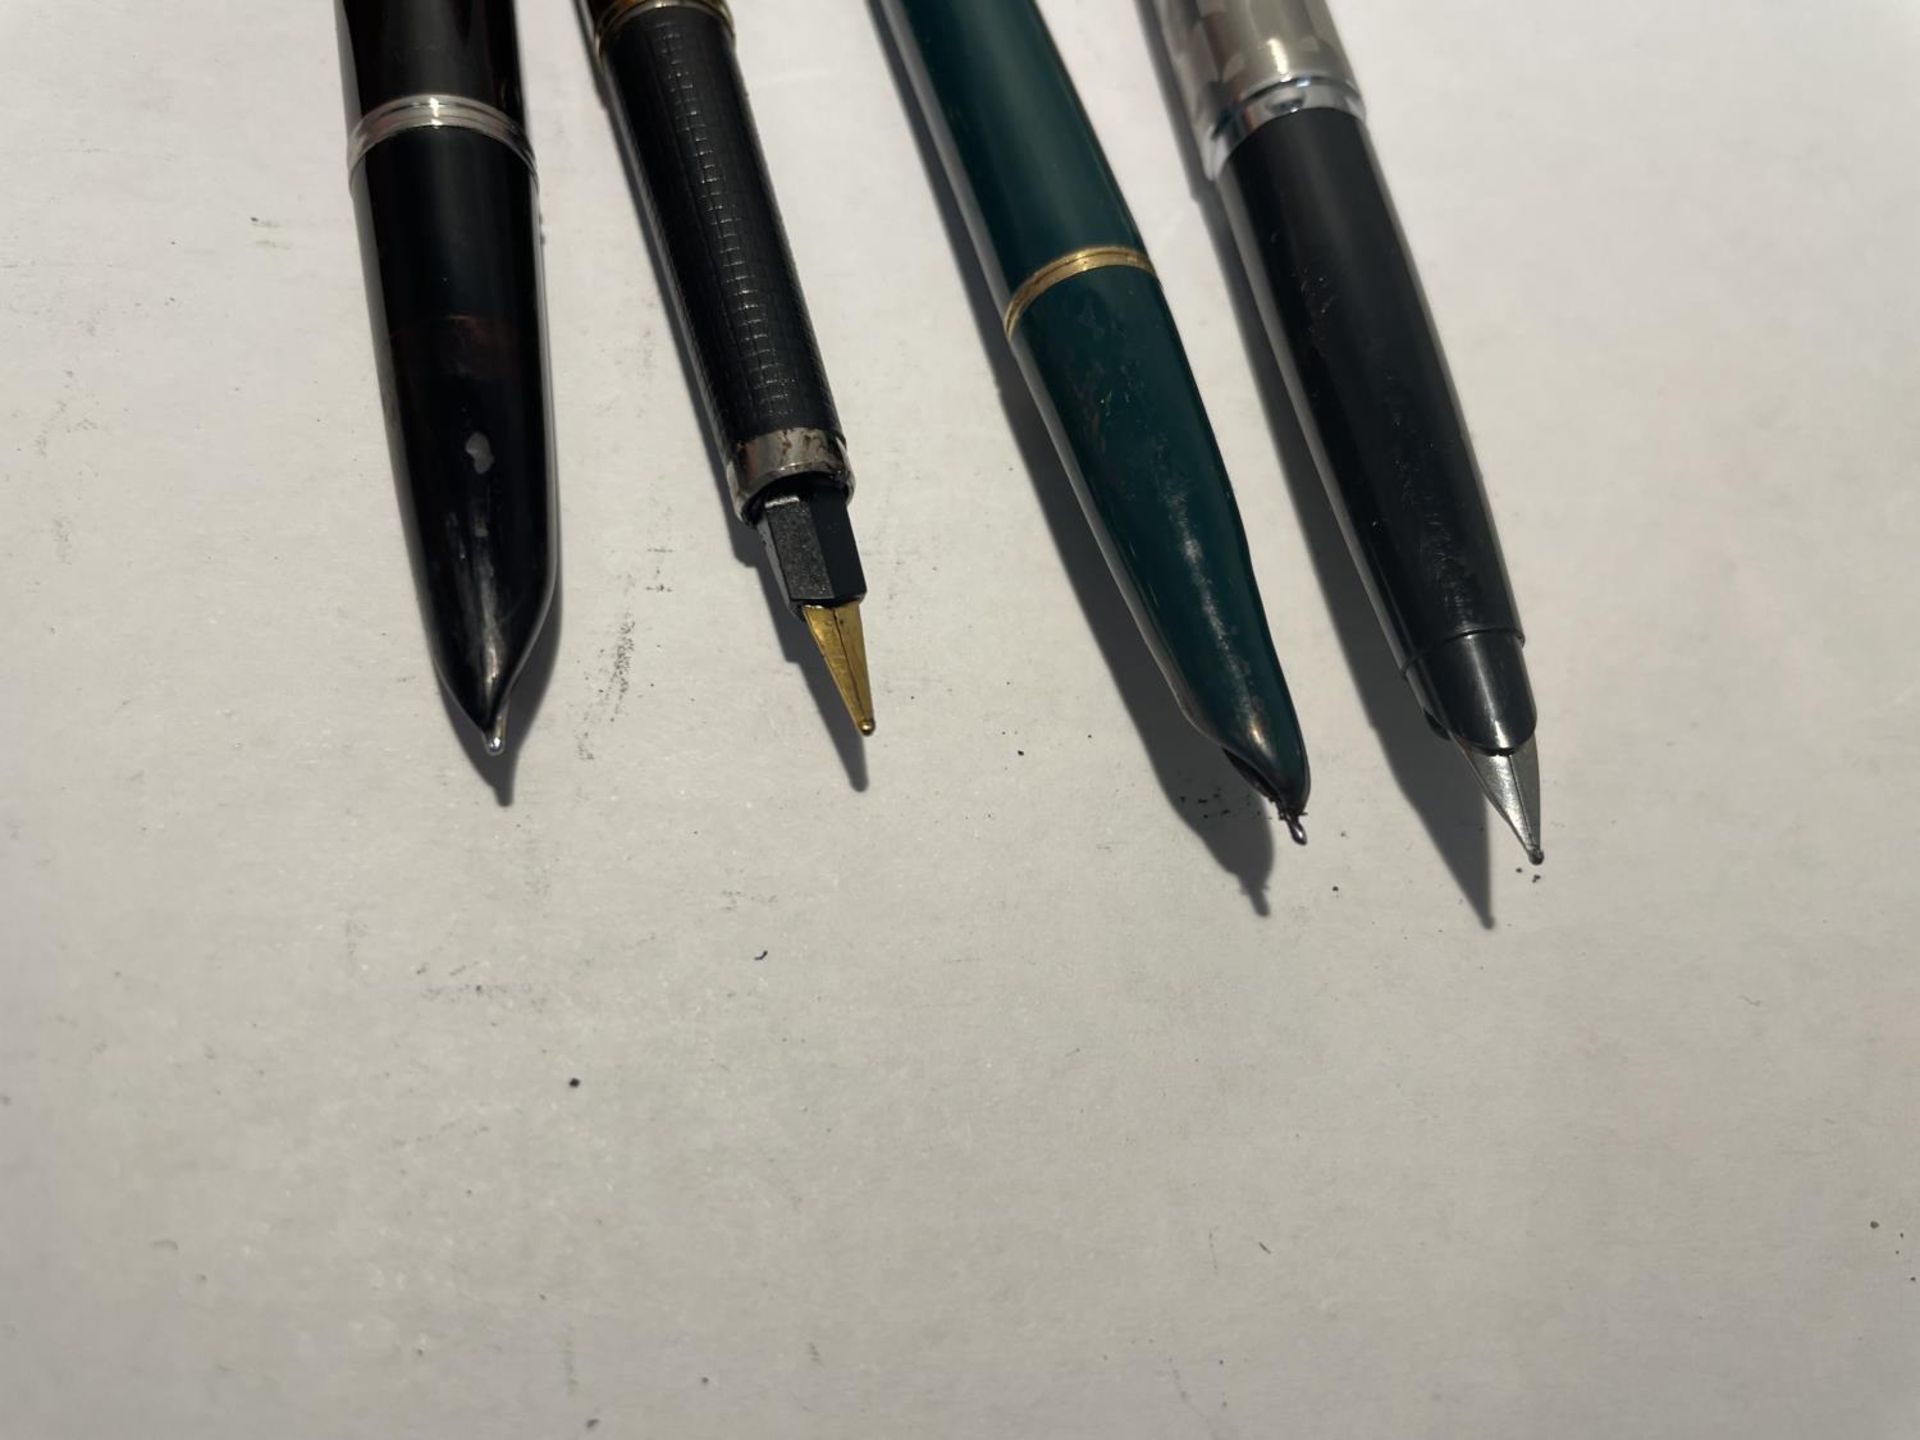 FOUR VINTAGE PARKER FOUNTAIN PENS WITH 14 CARAT GOLD NIBS - Image 3 of 3